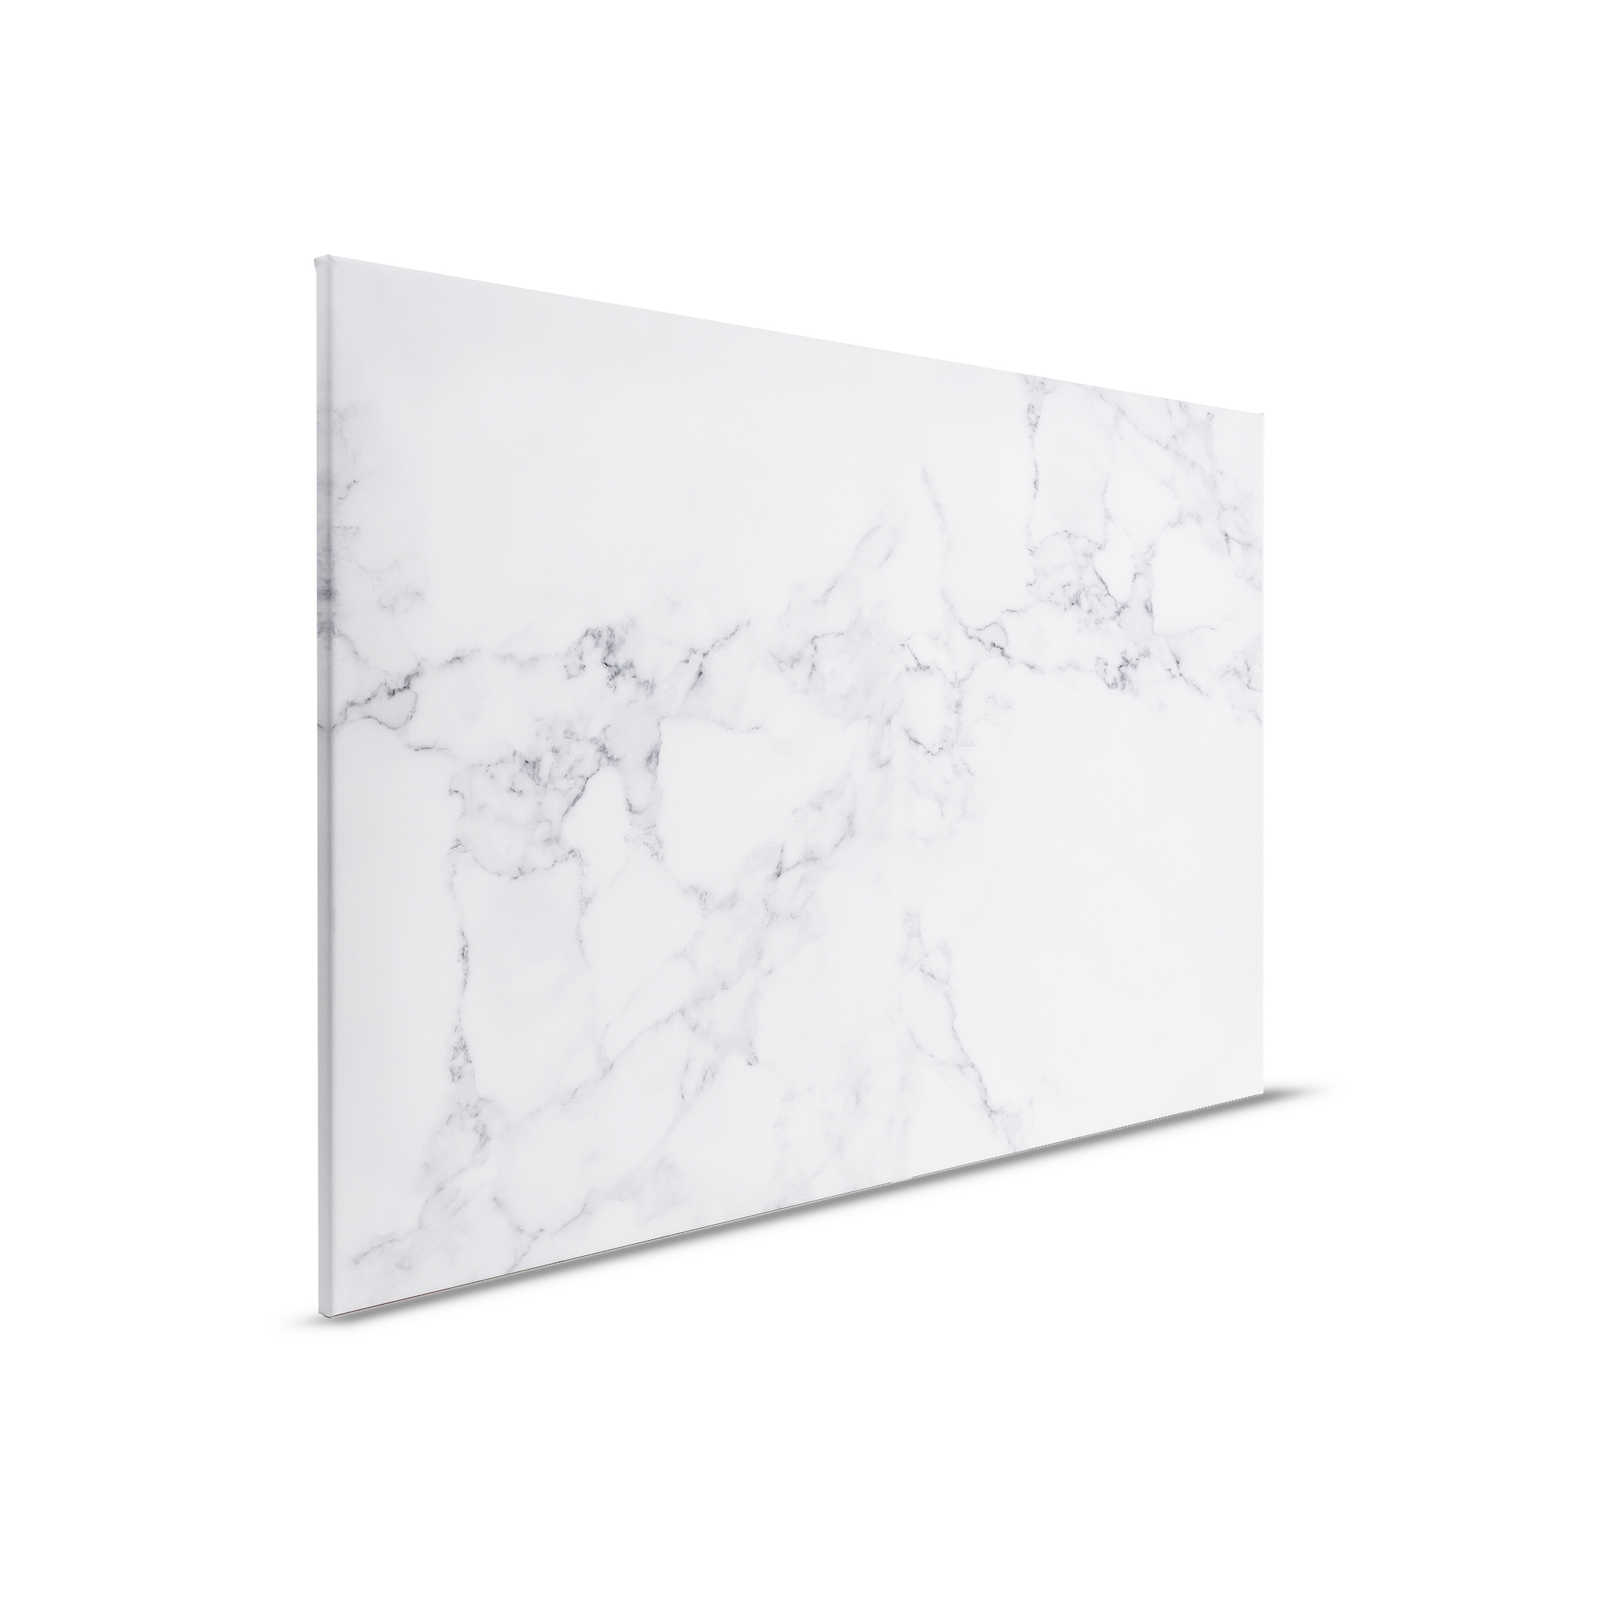         Canvas with marble look - 0.90 m x 0.60 m
    